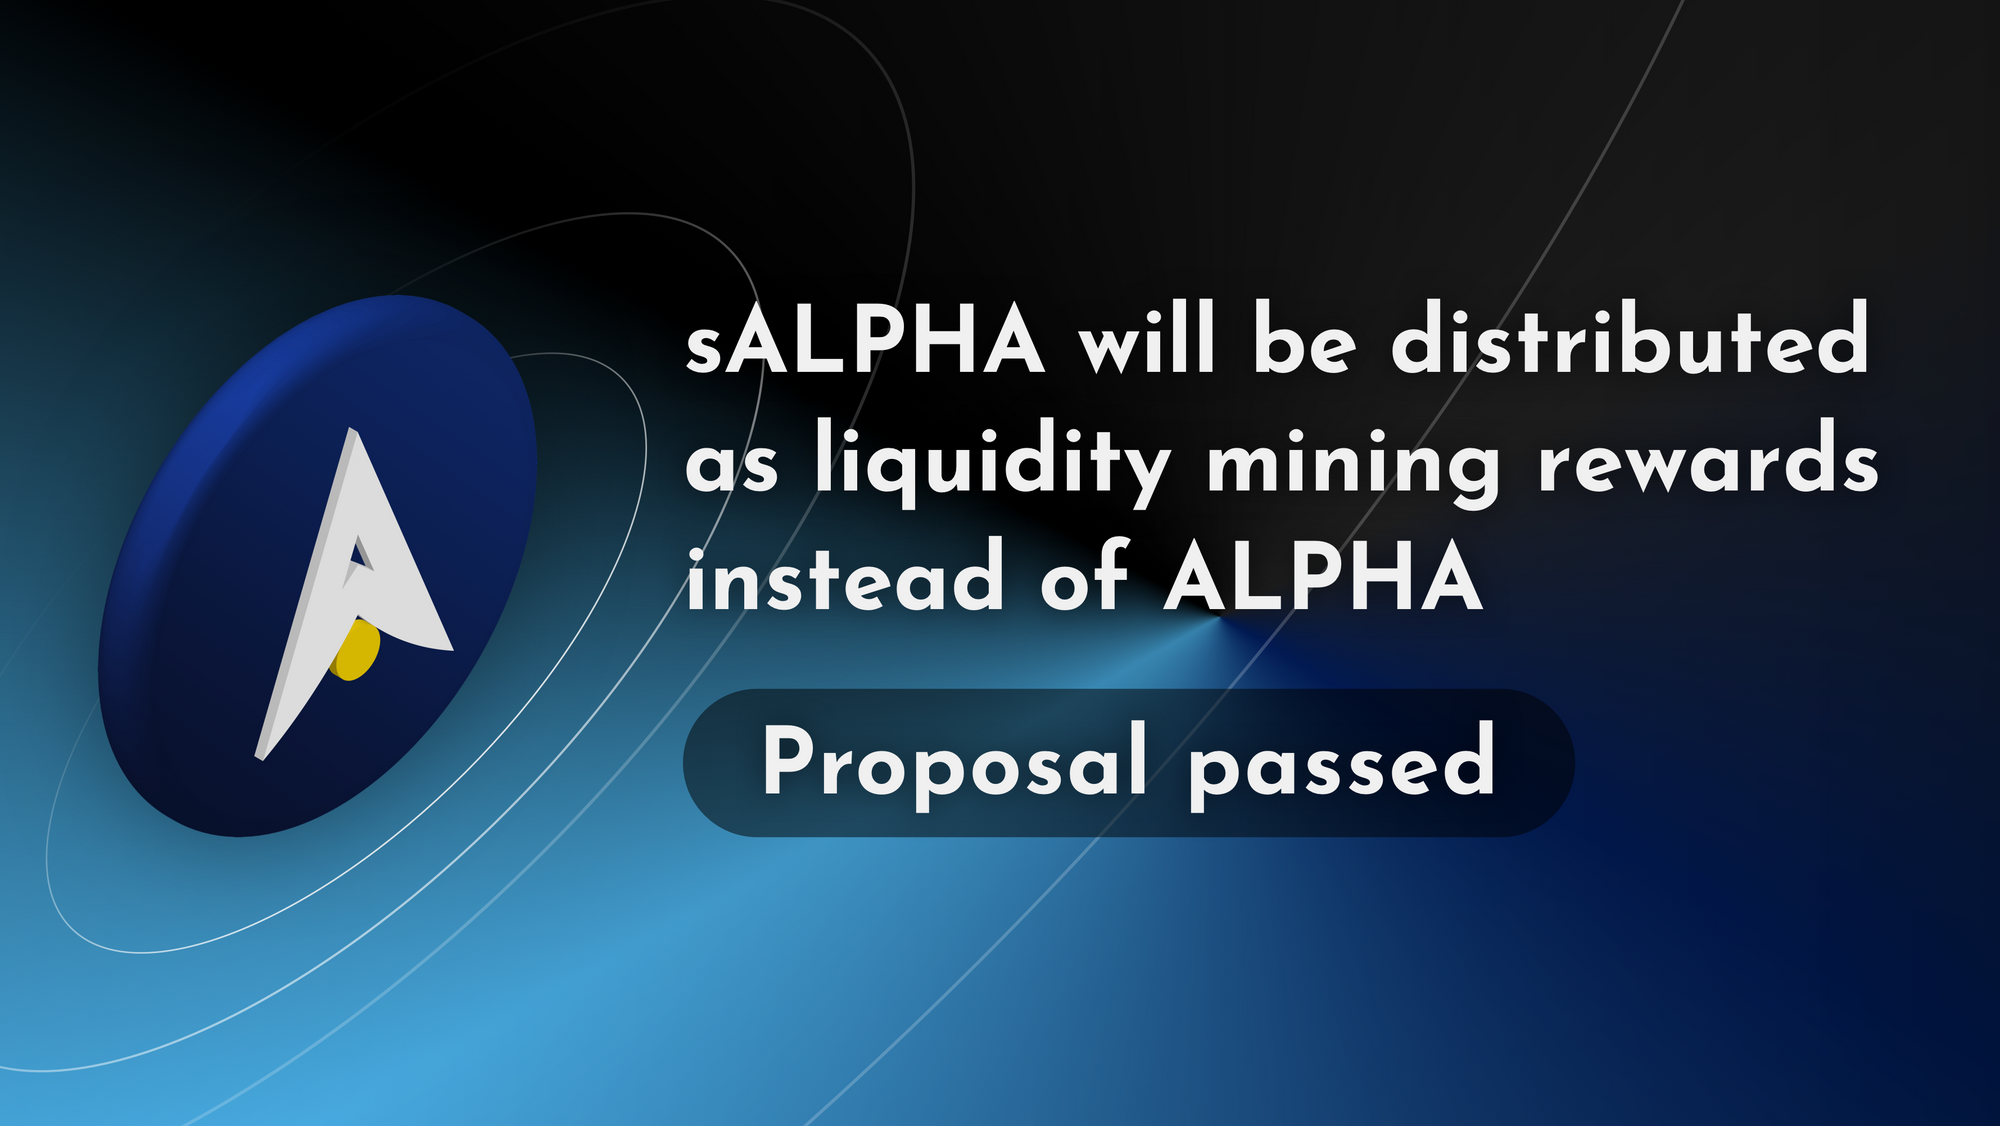 Proposal passed: sALPHA will be distributed as liquidity mining rewards instead of ALPHA